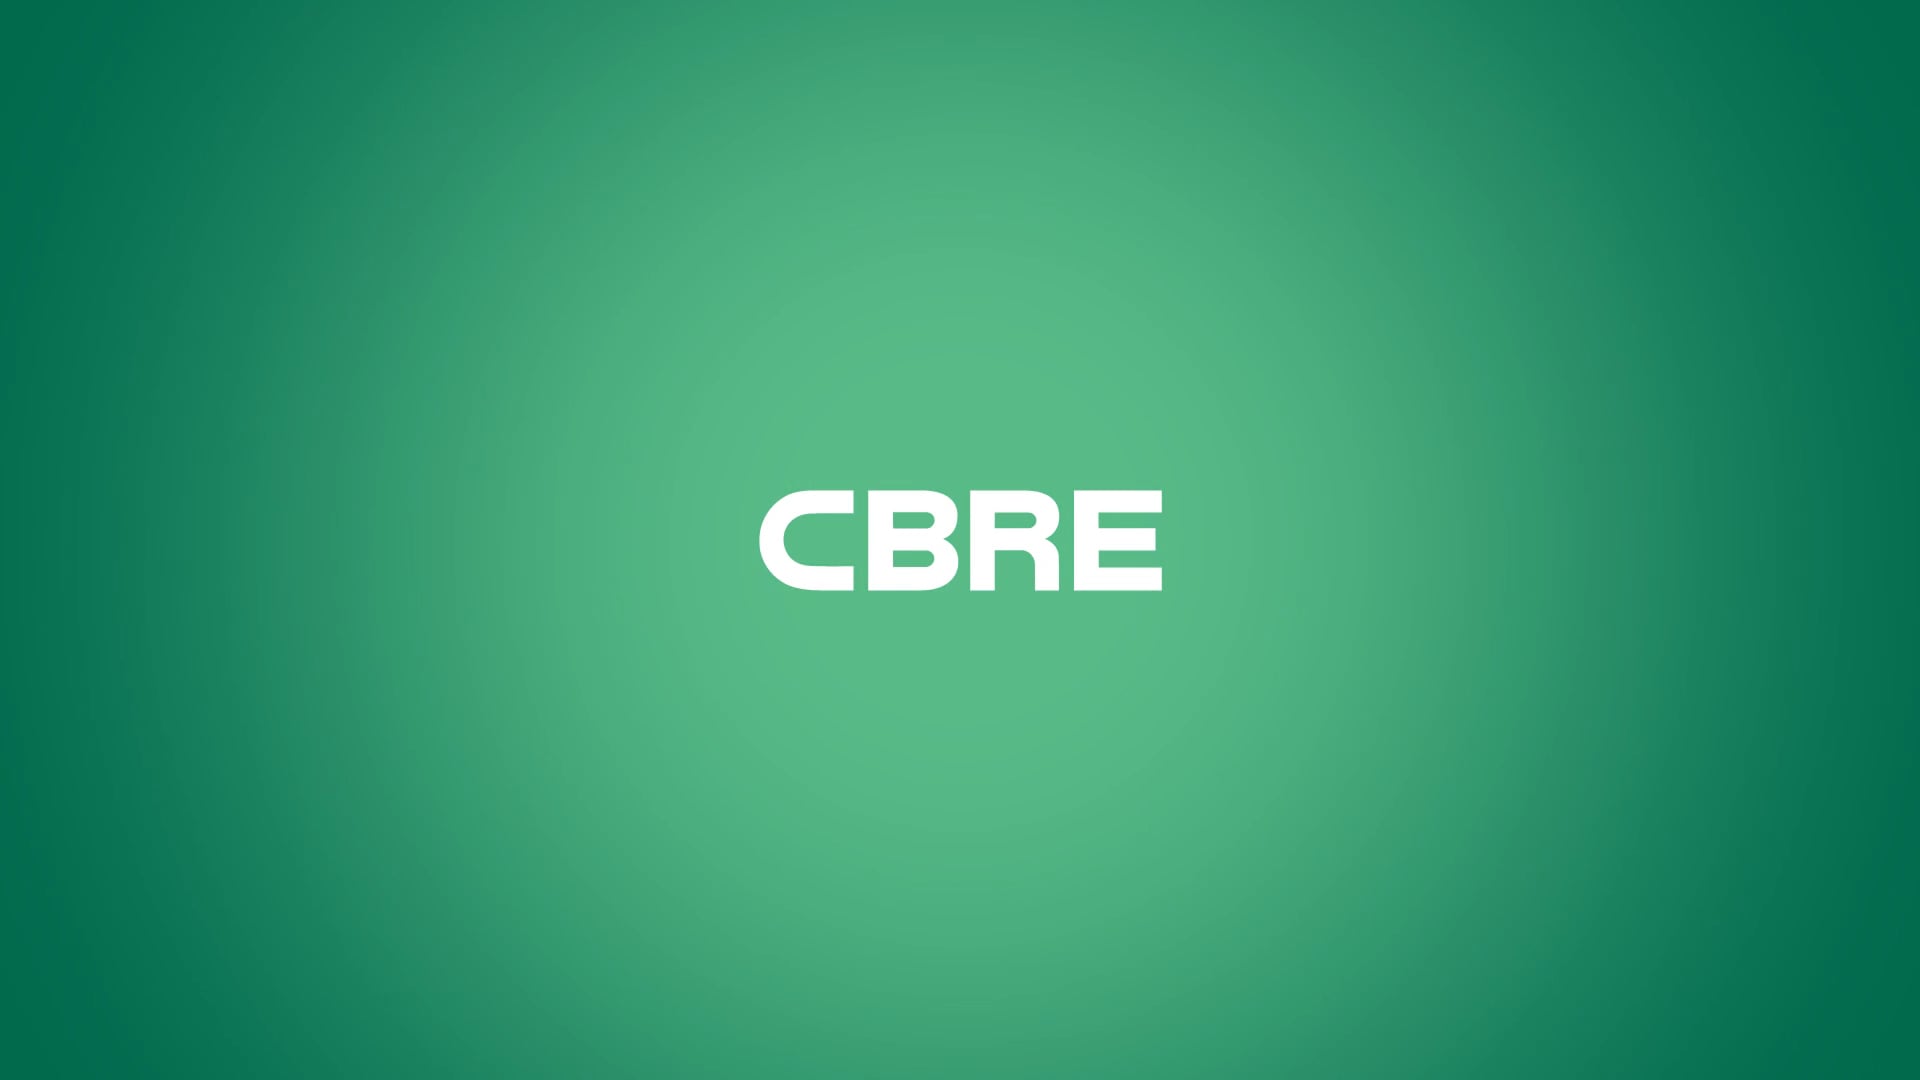 CBRE Womans Network Conference Highlight